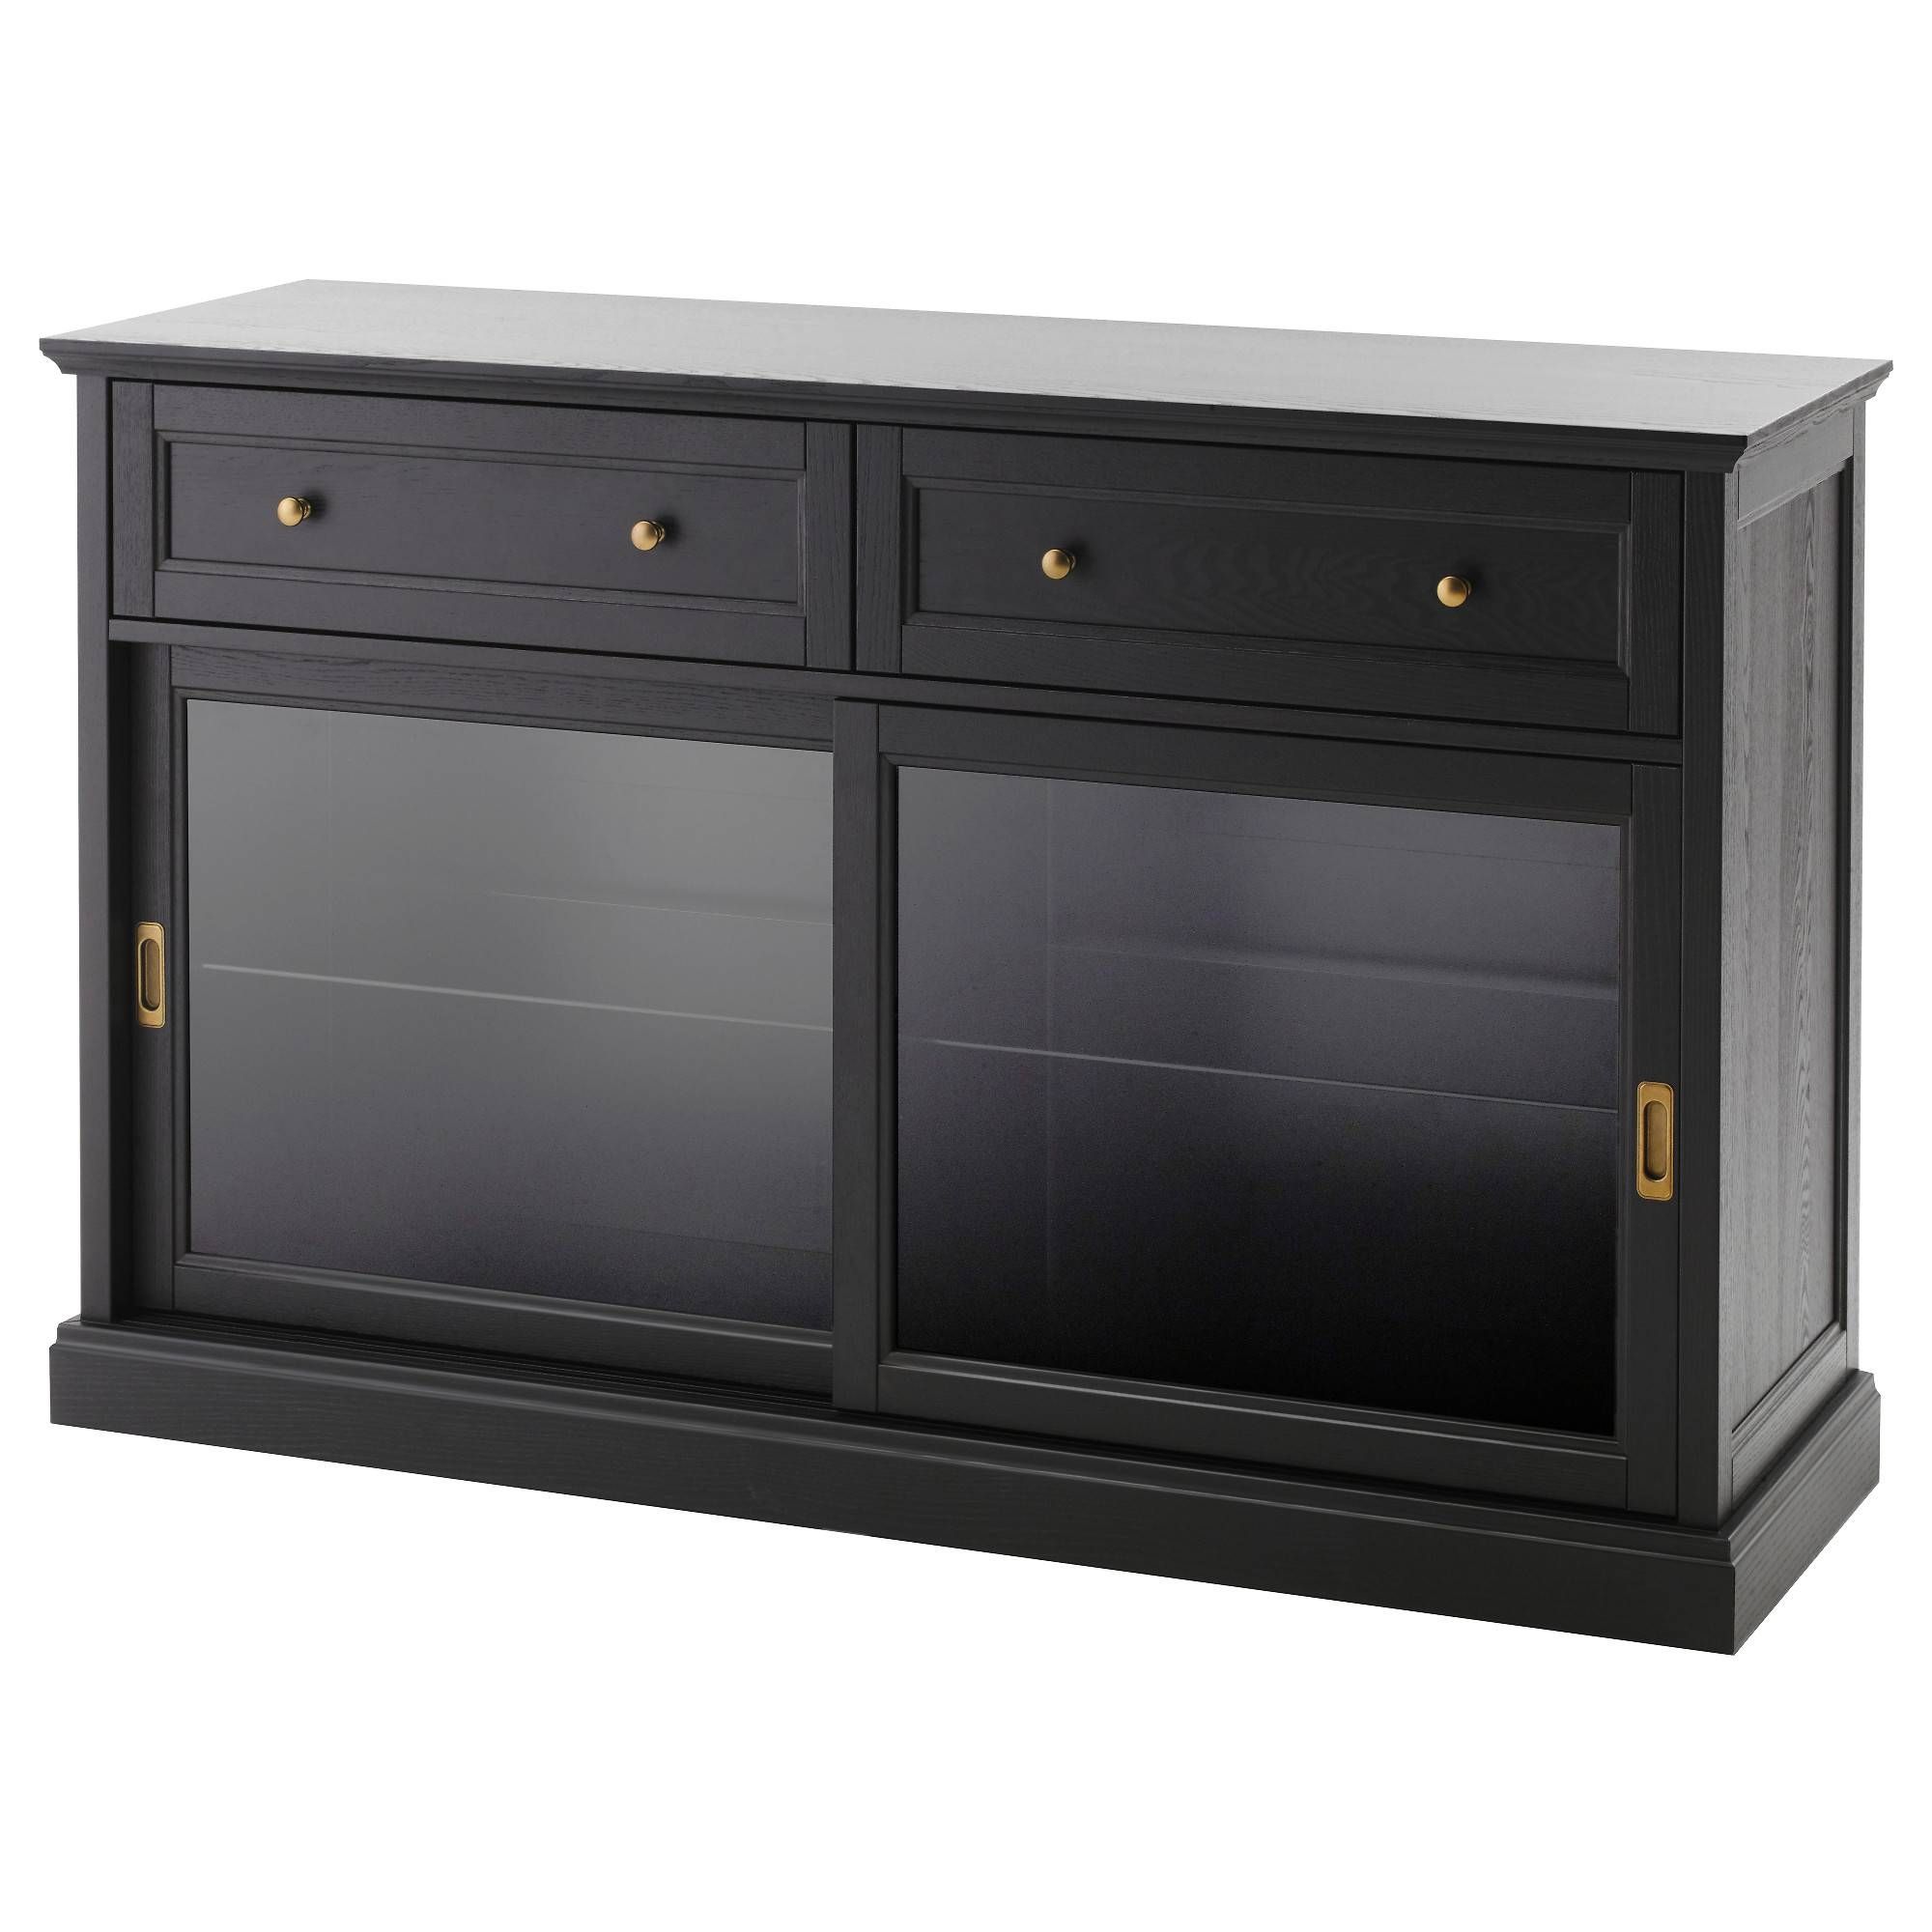 Malsjö Sideboard – Ikea Intended For Most Current Canada Ikea Sideboards (View 14 of 15)